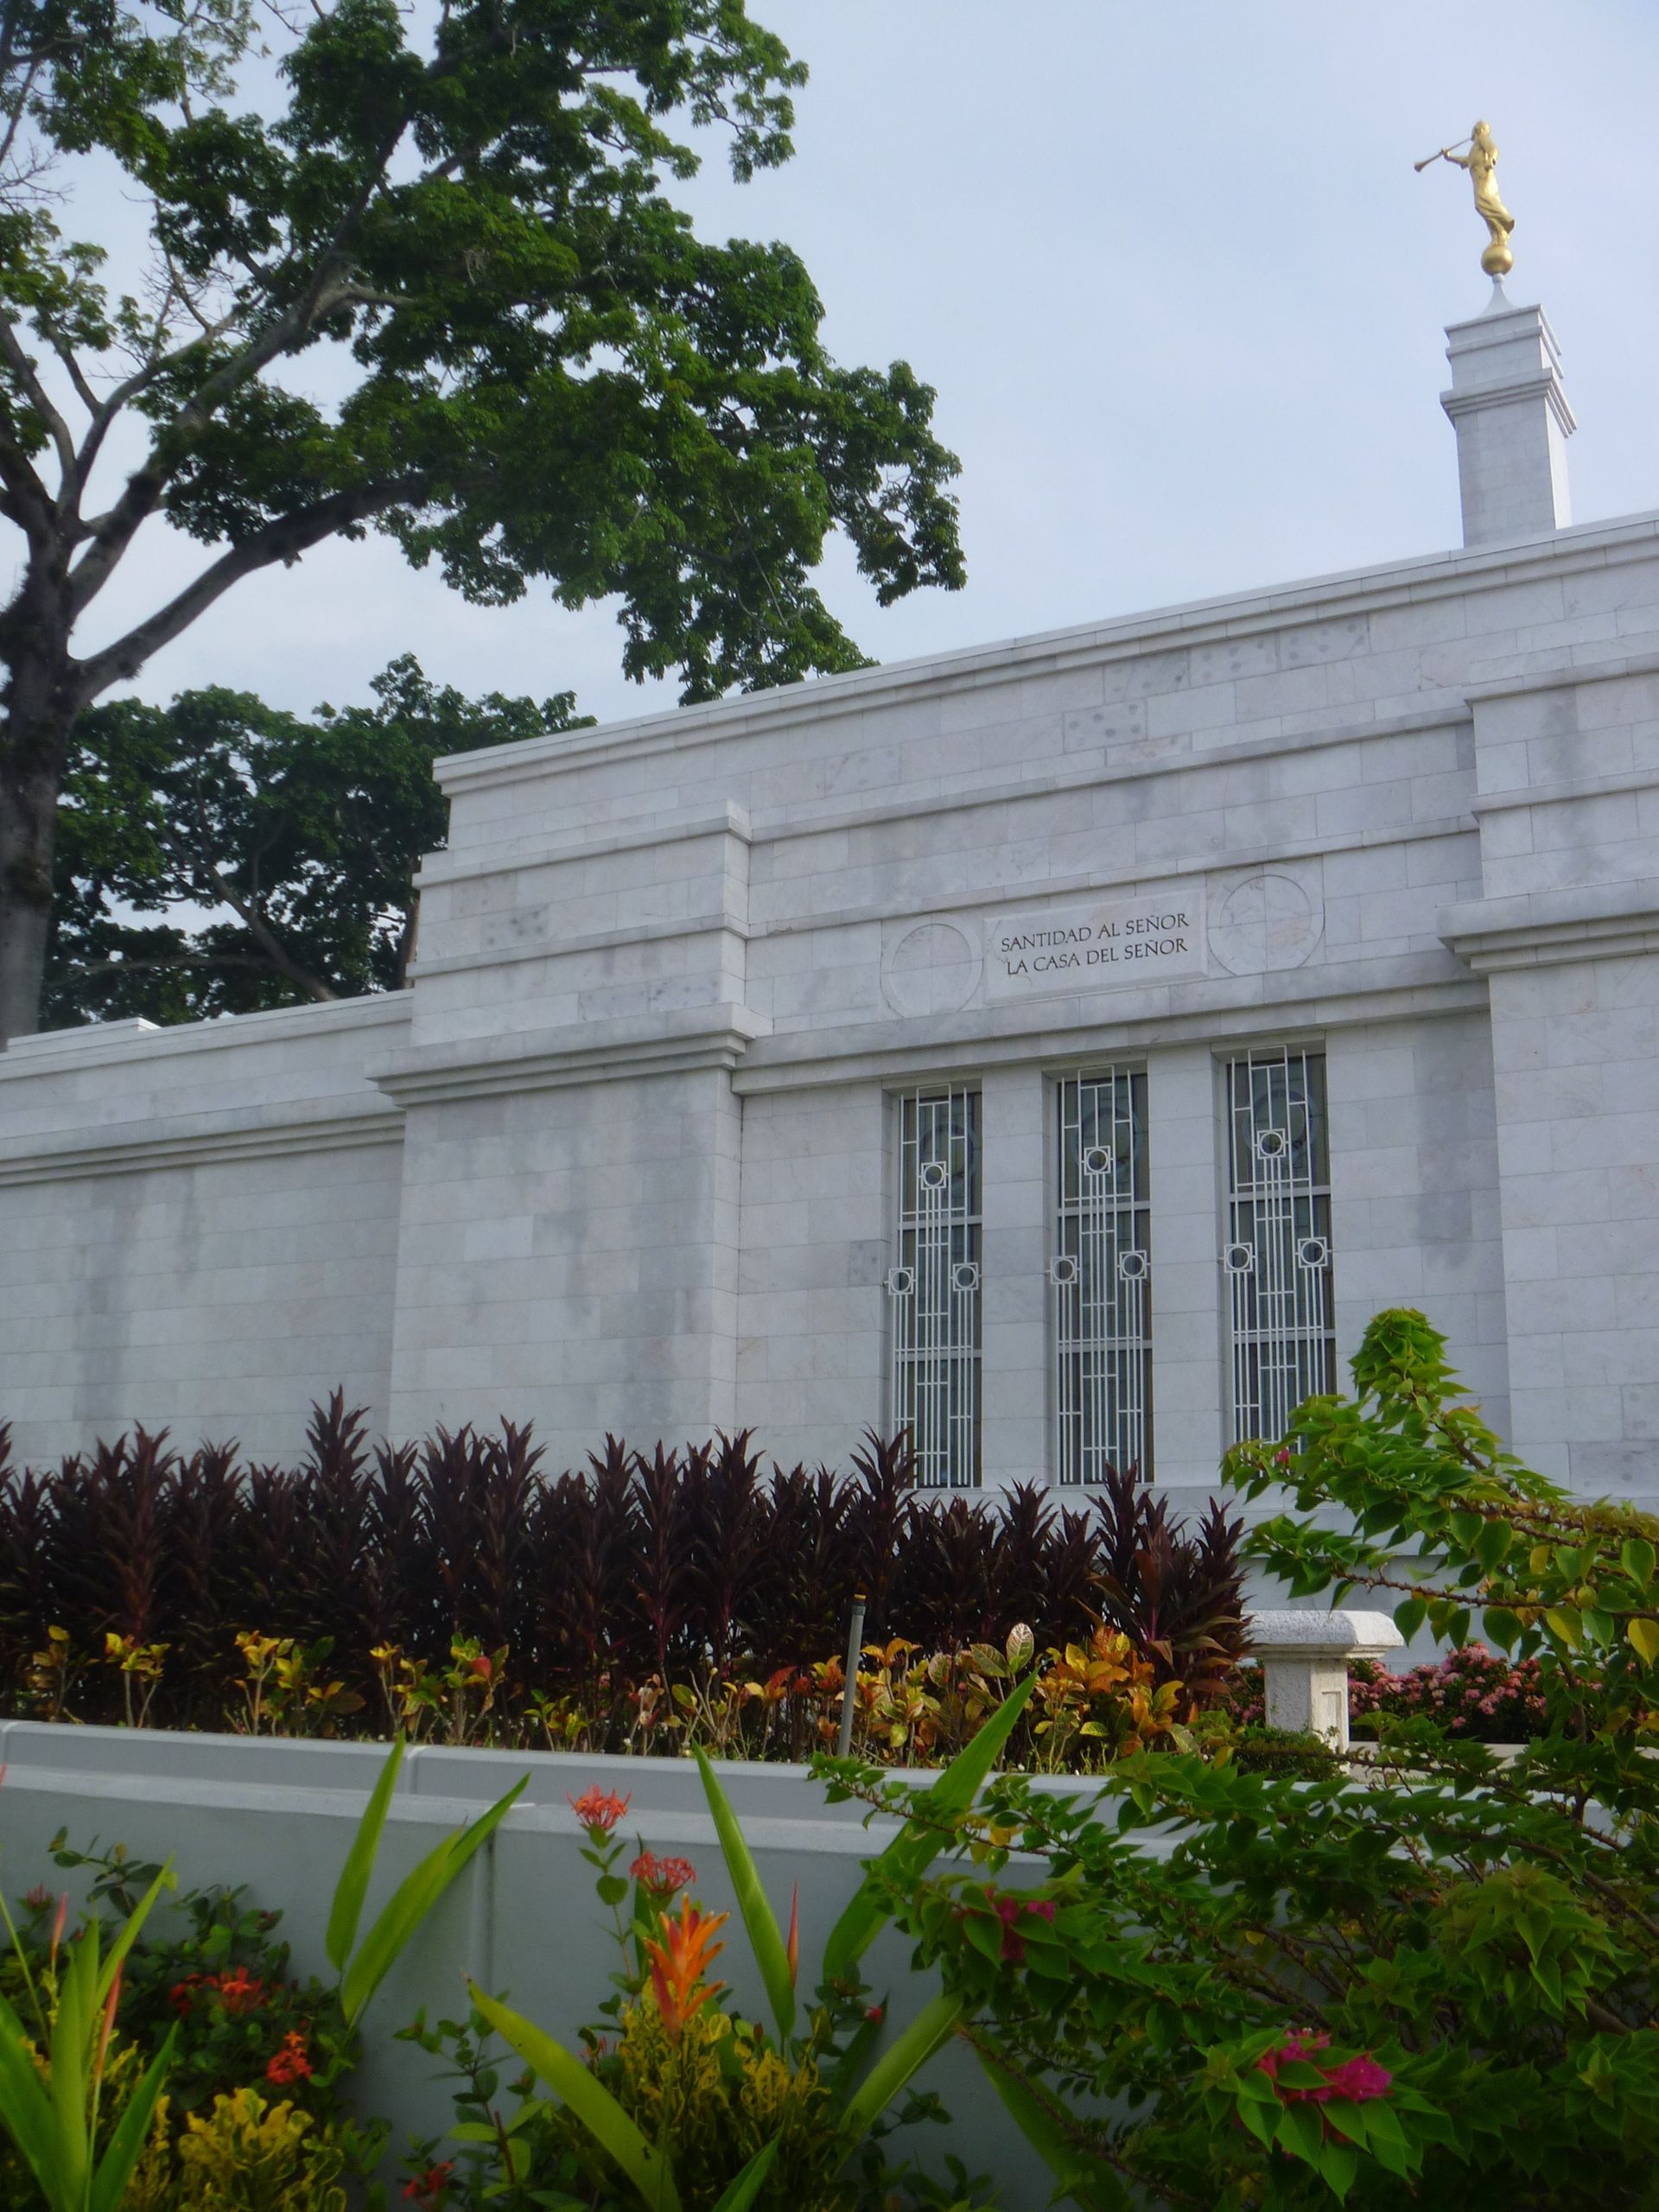 The Villahermosa Mexico Temple, with the windows, spire, and scenery.